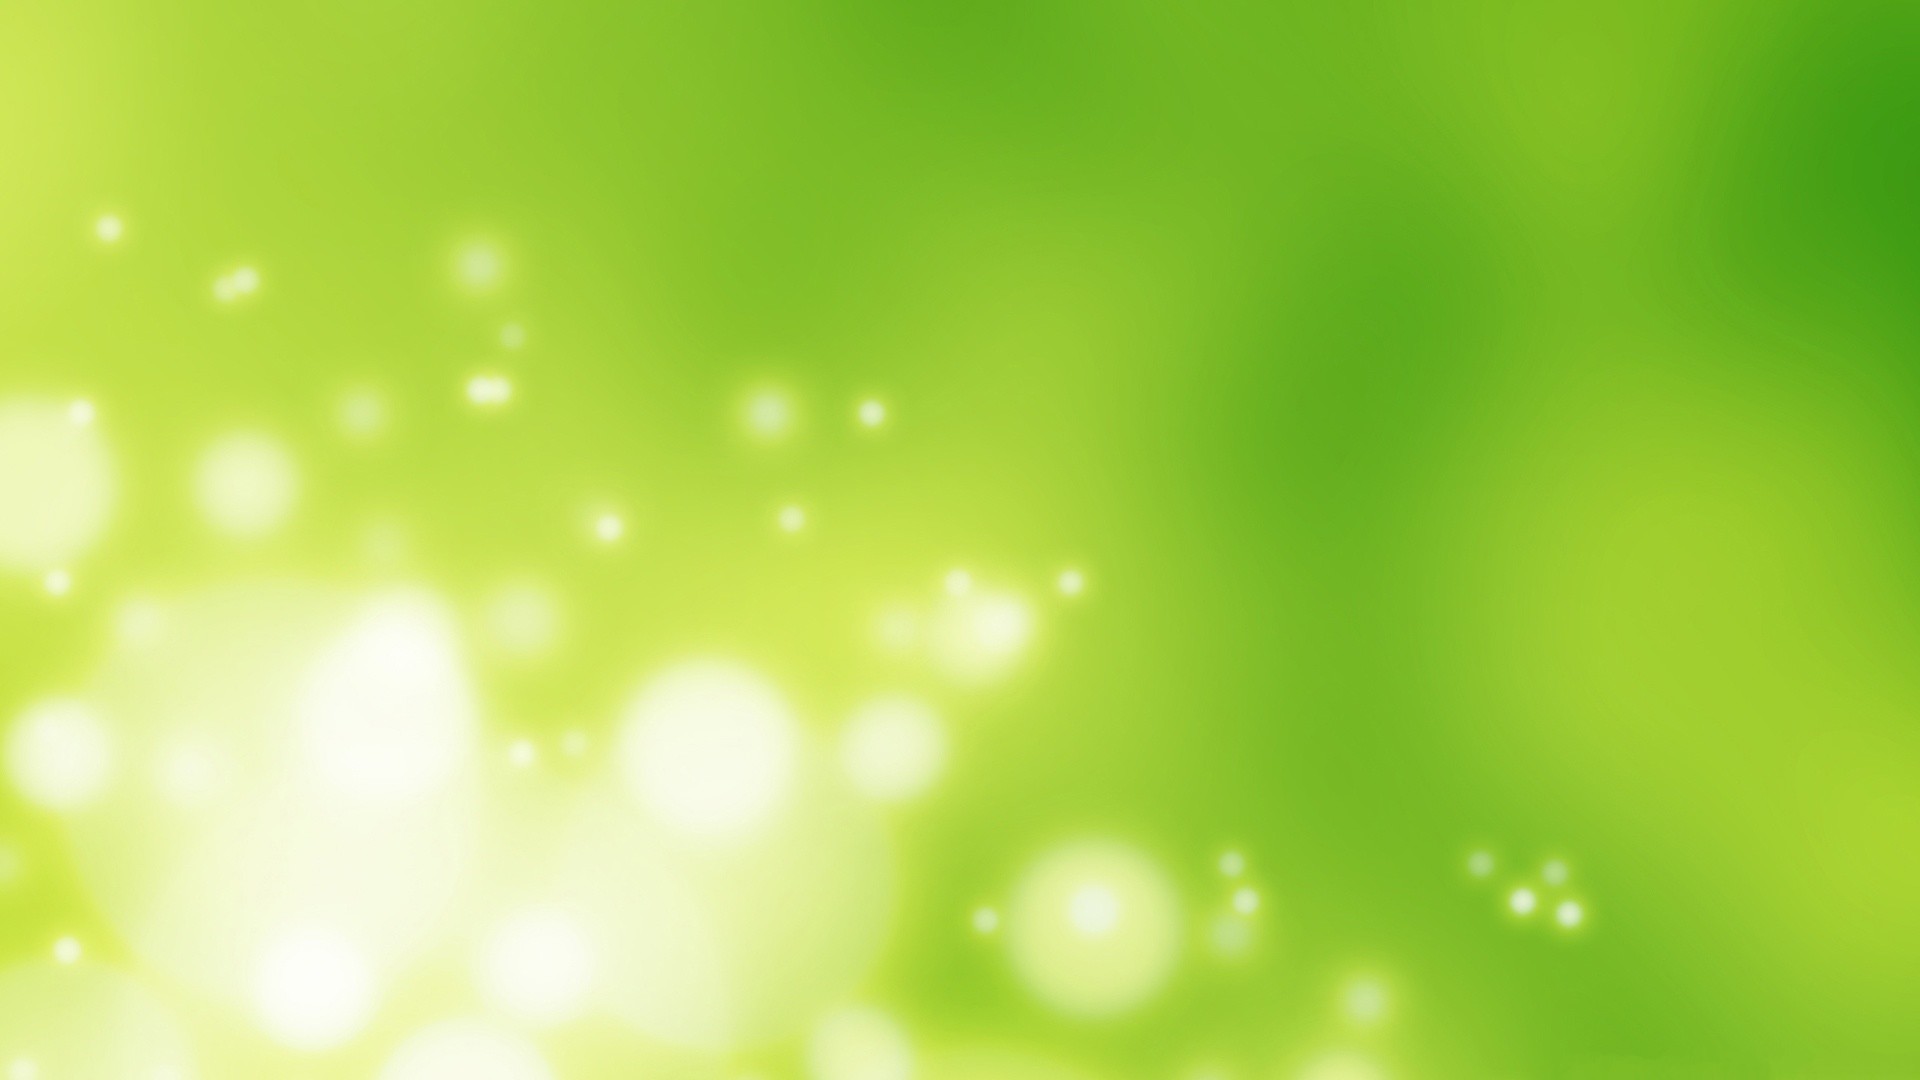 1920x1080 Download Free Lime Green Background.